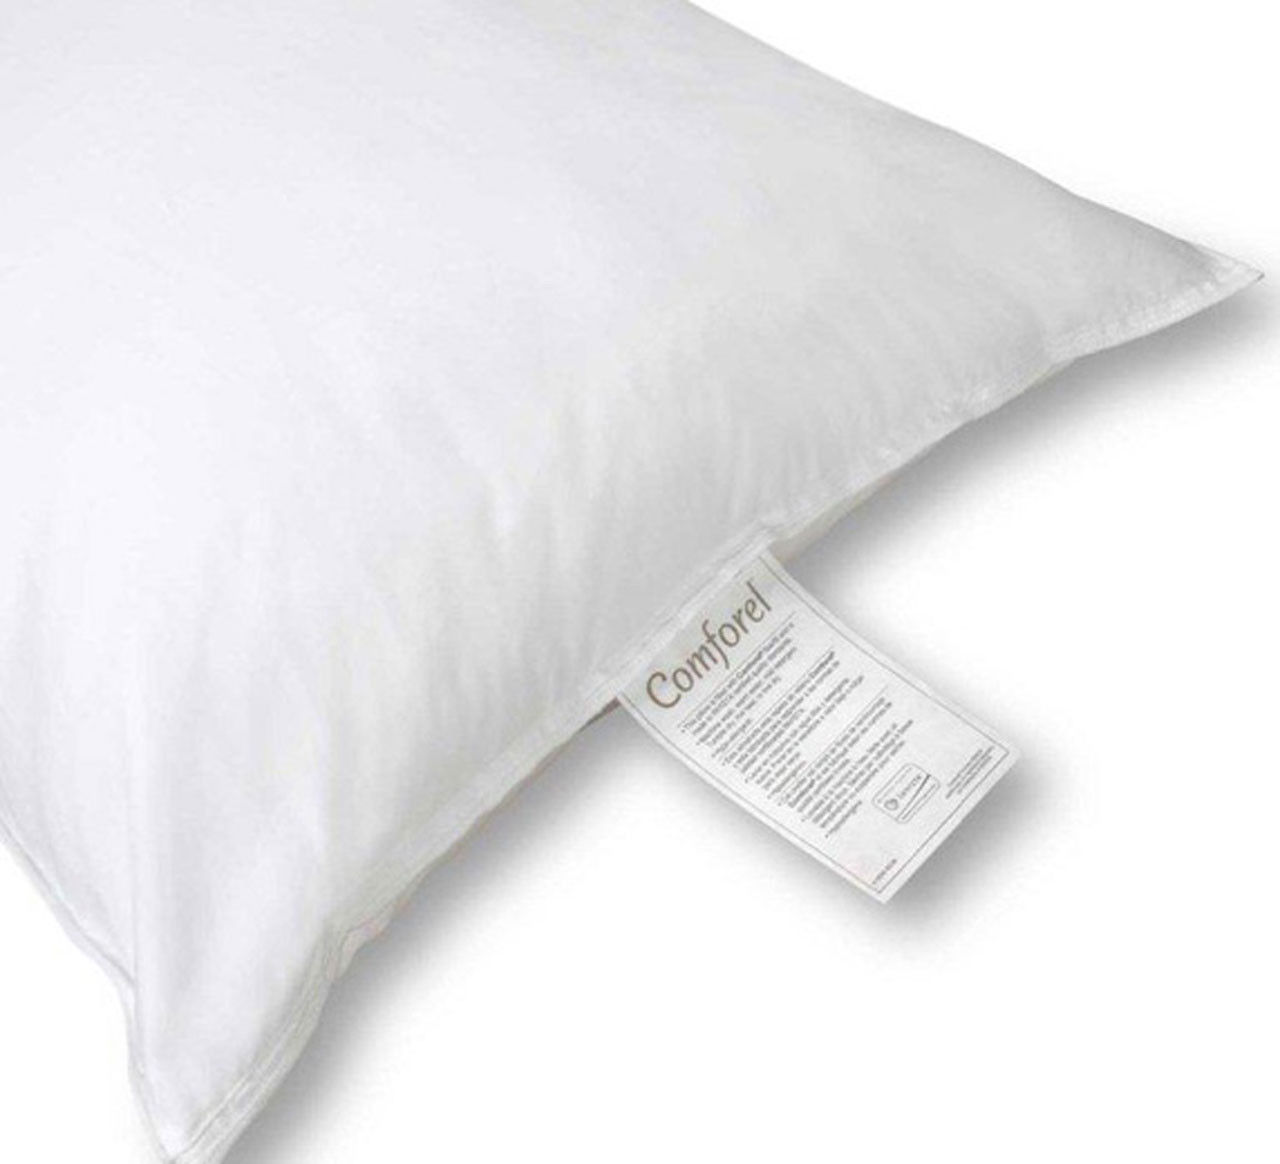 What makes Comforel® Pillows unique among other comforel pillows?